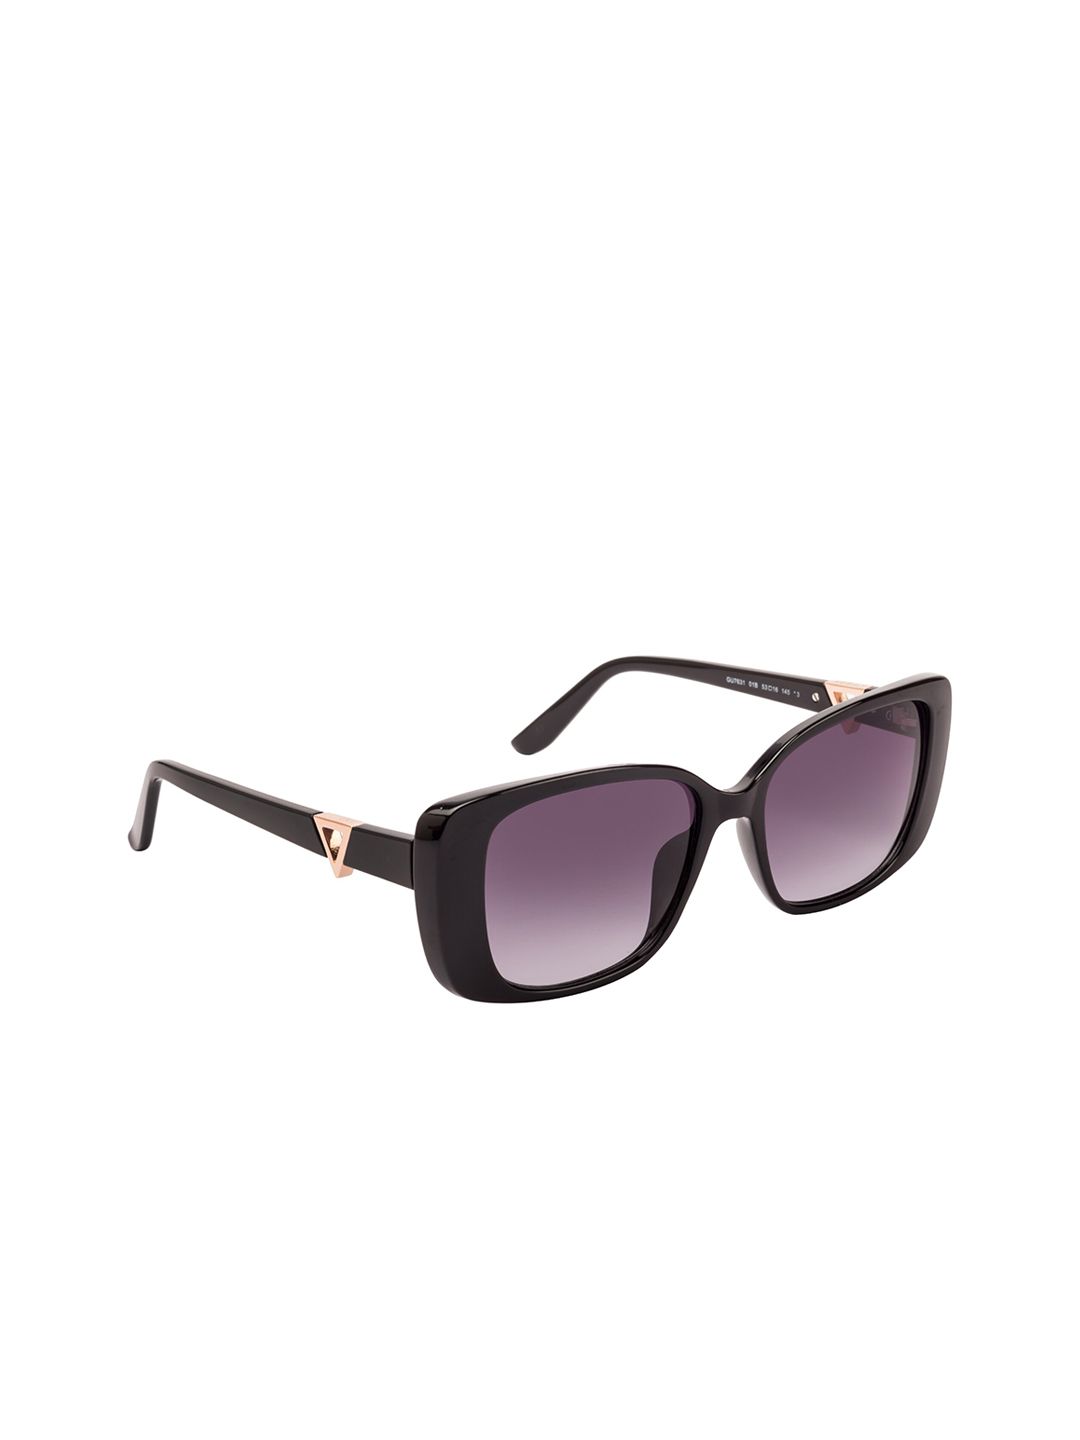 GUESS Women Rectangle UV Protected Sunglasses GU7631 53 01B Price in India